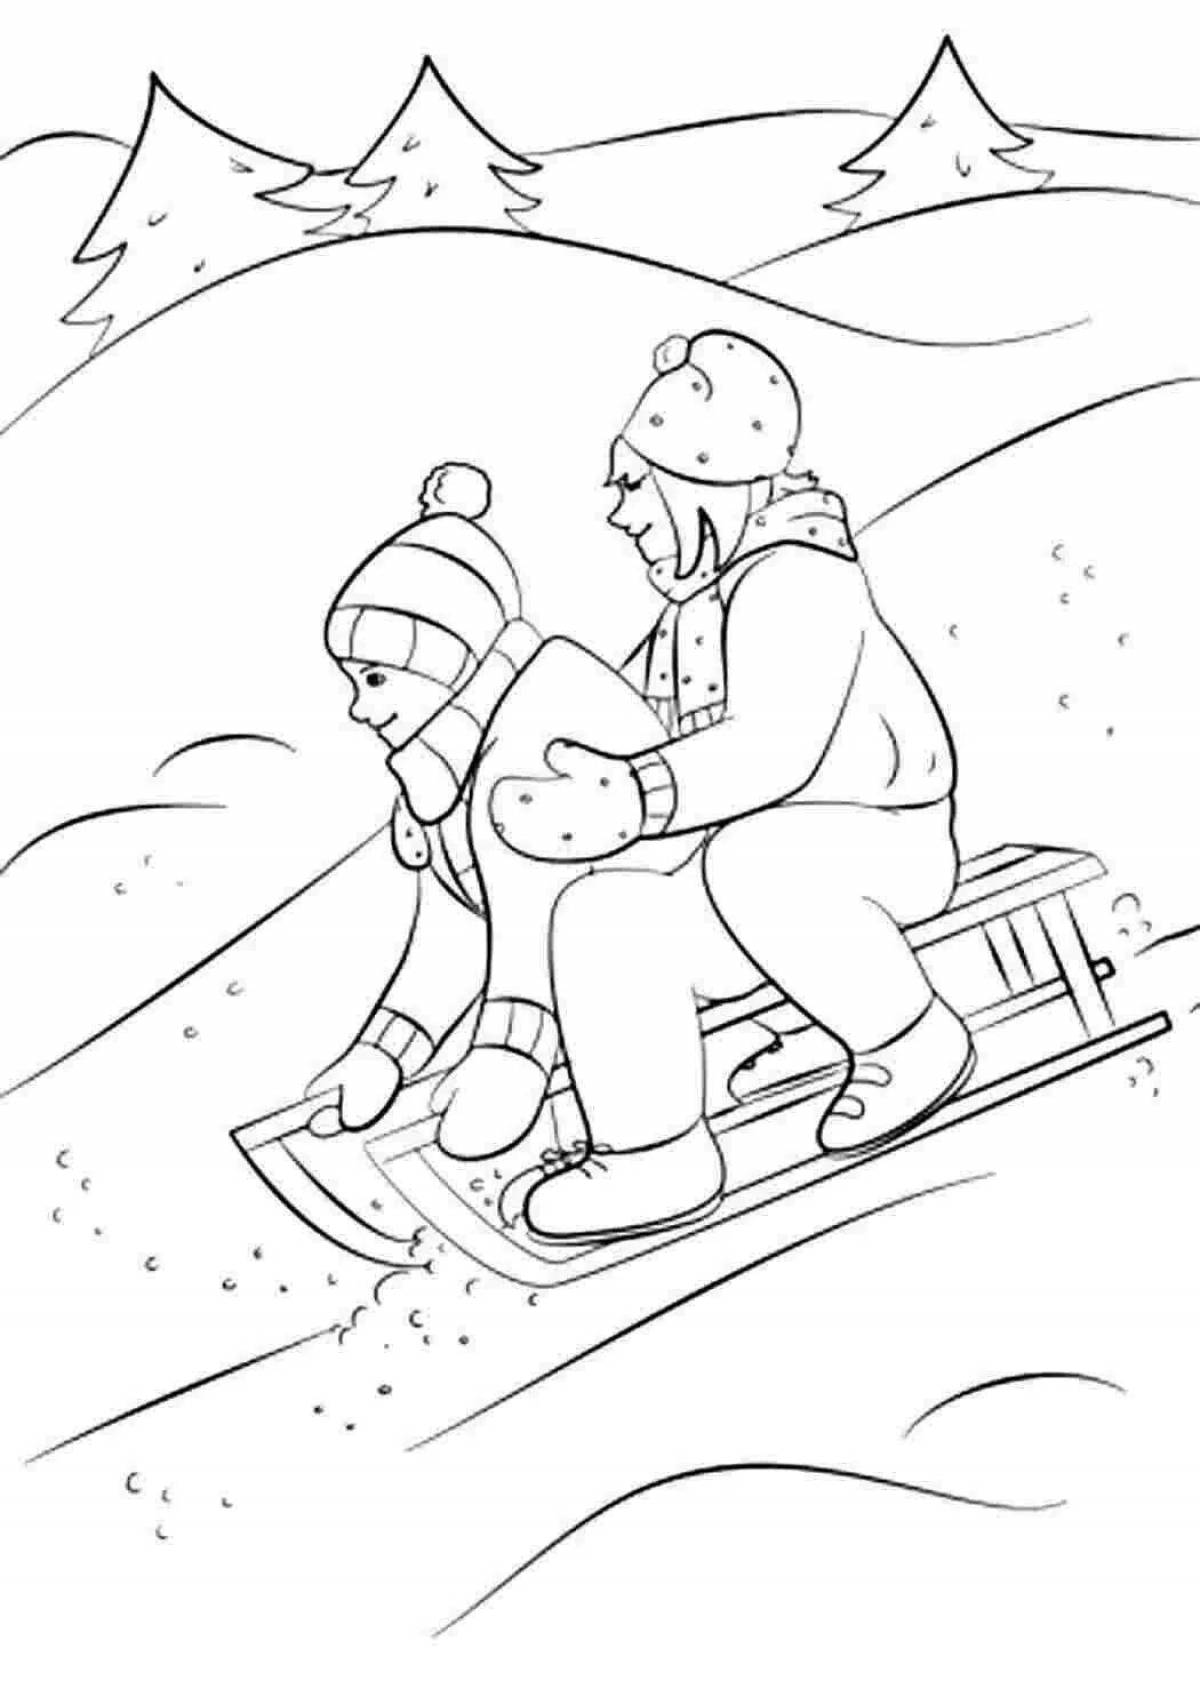 Gorgeous winter slide coloring page